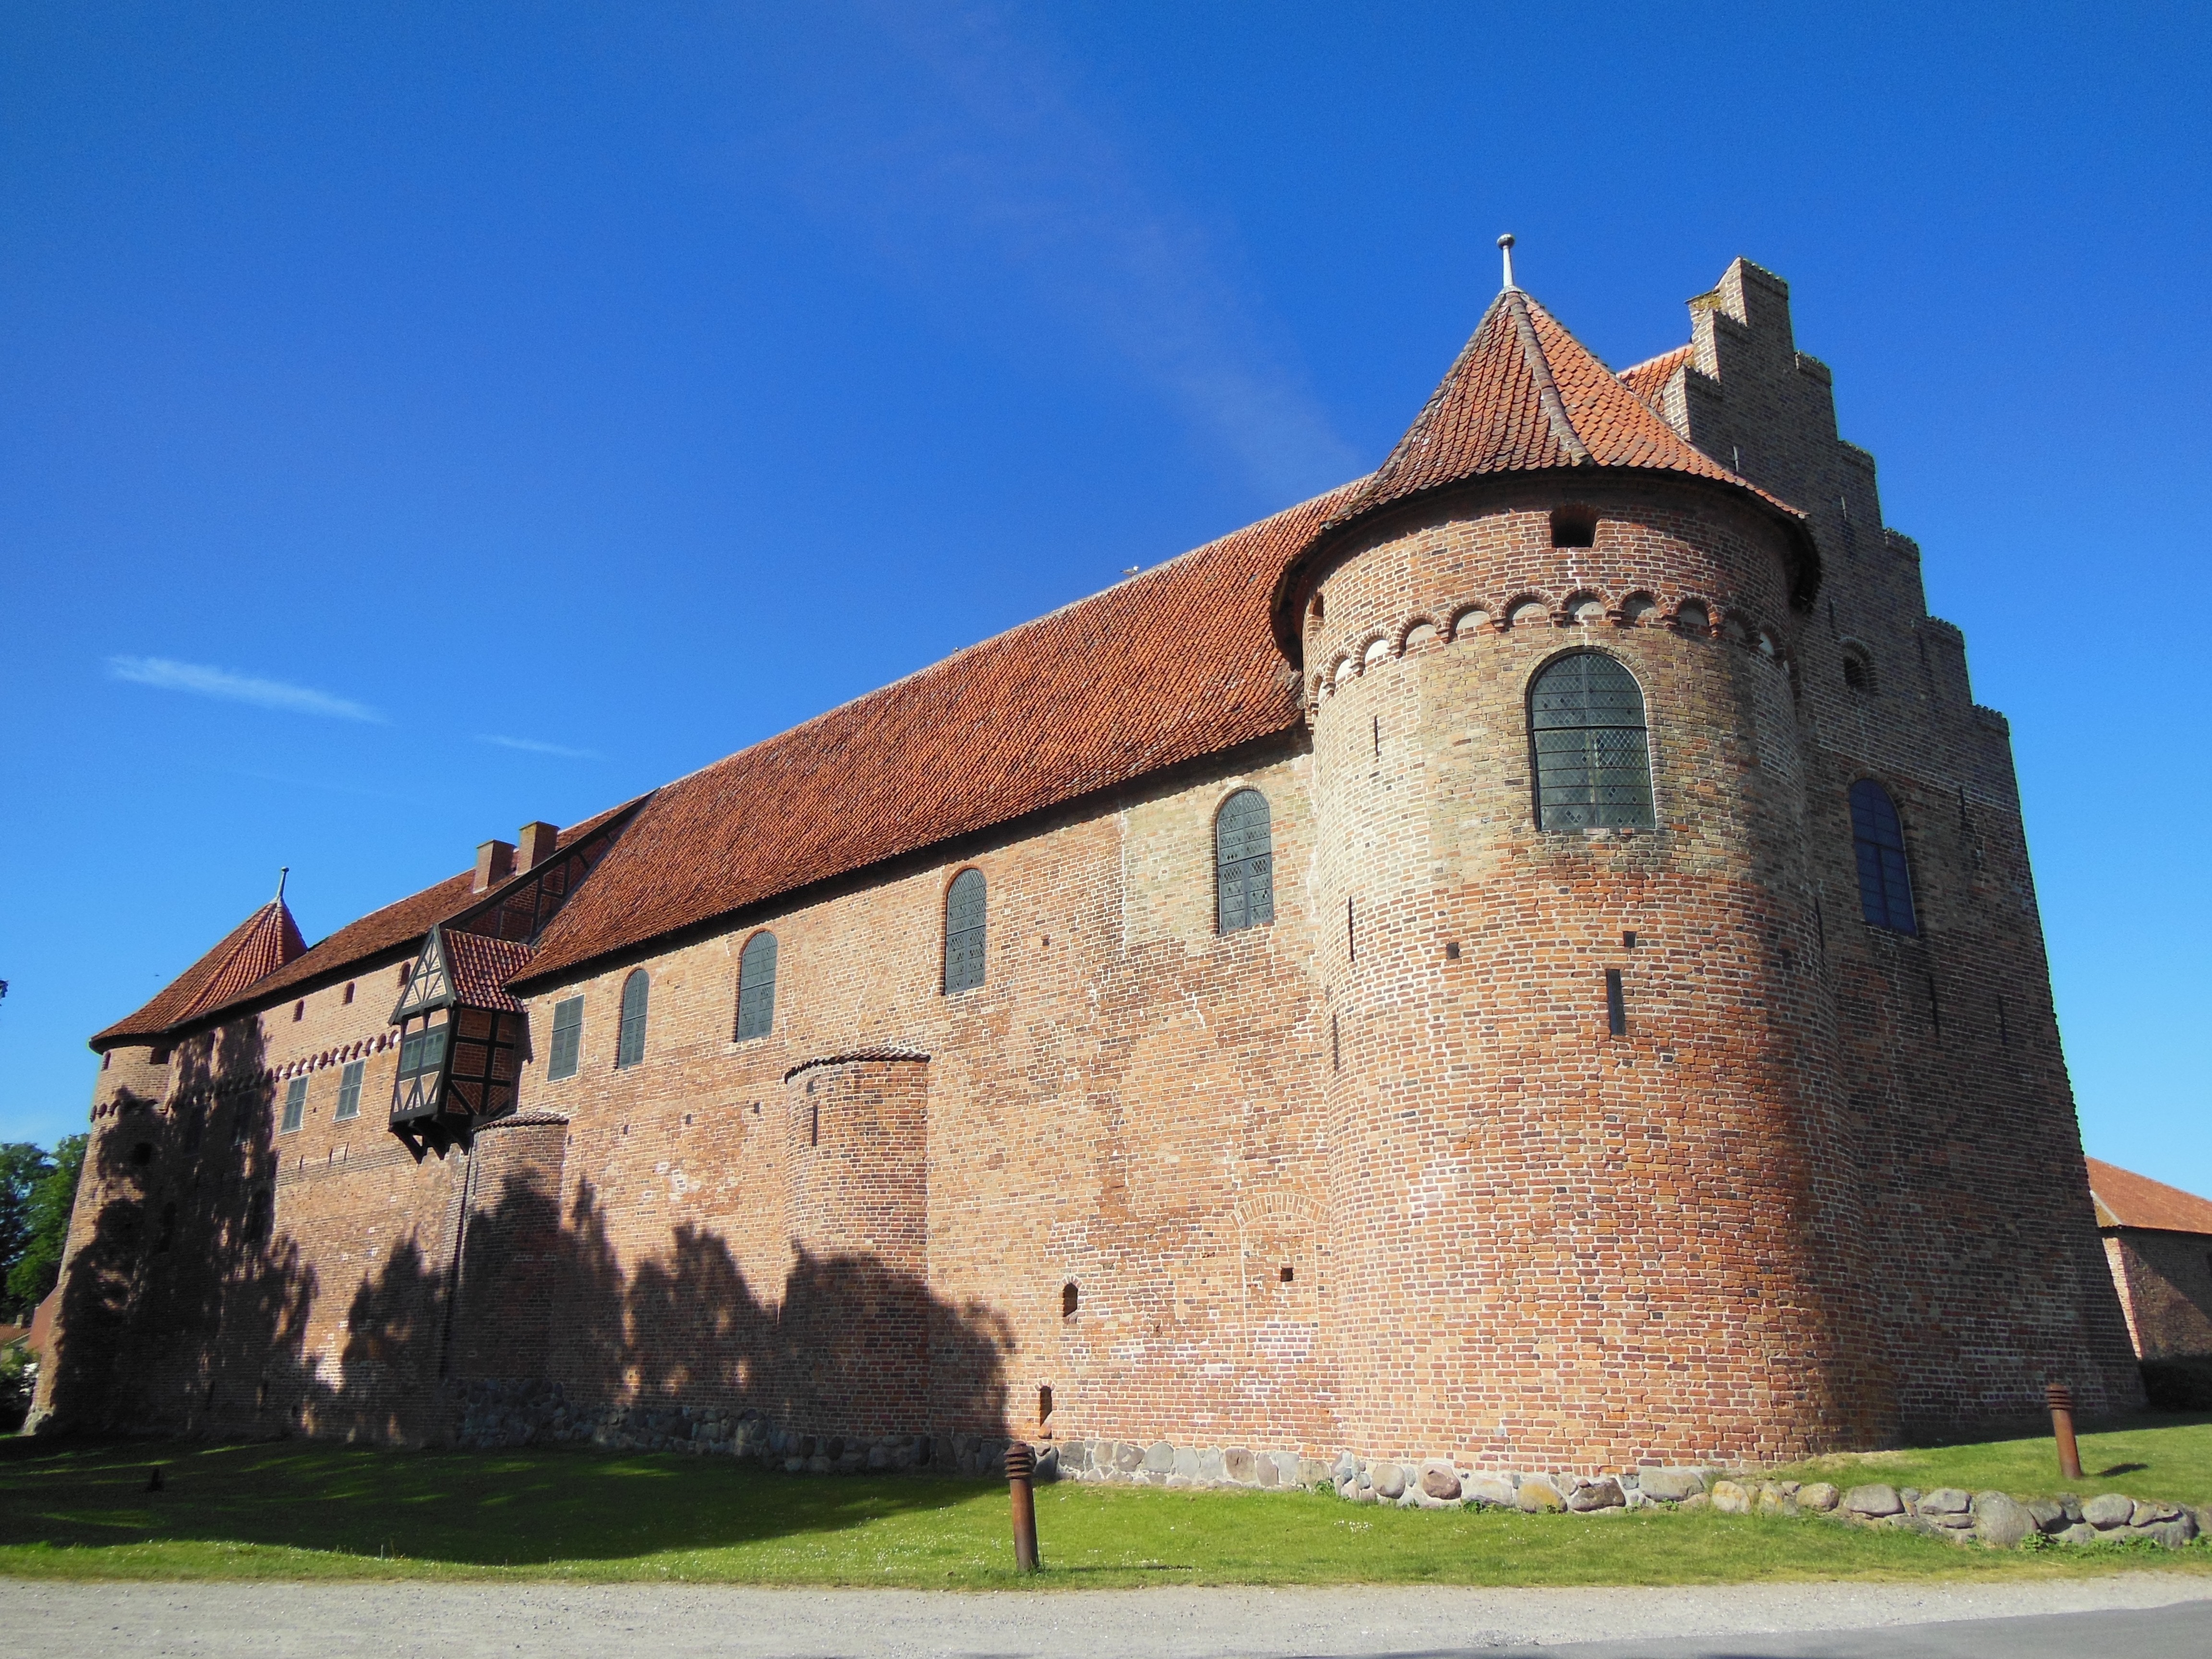 Castle, Cultural Heritage, Medieval, history, architecture